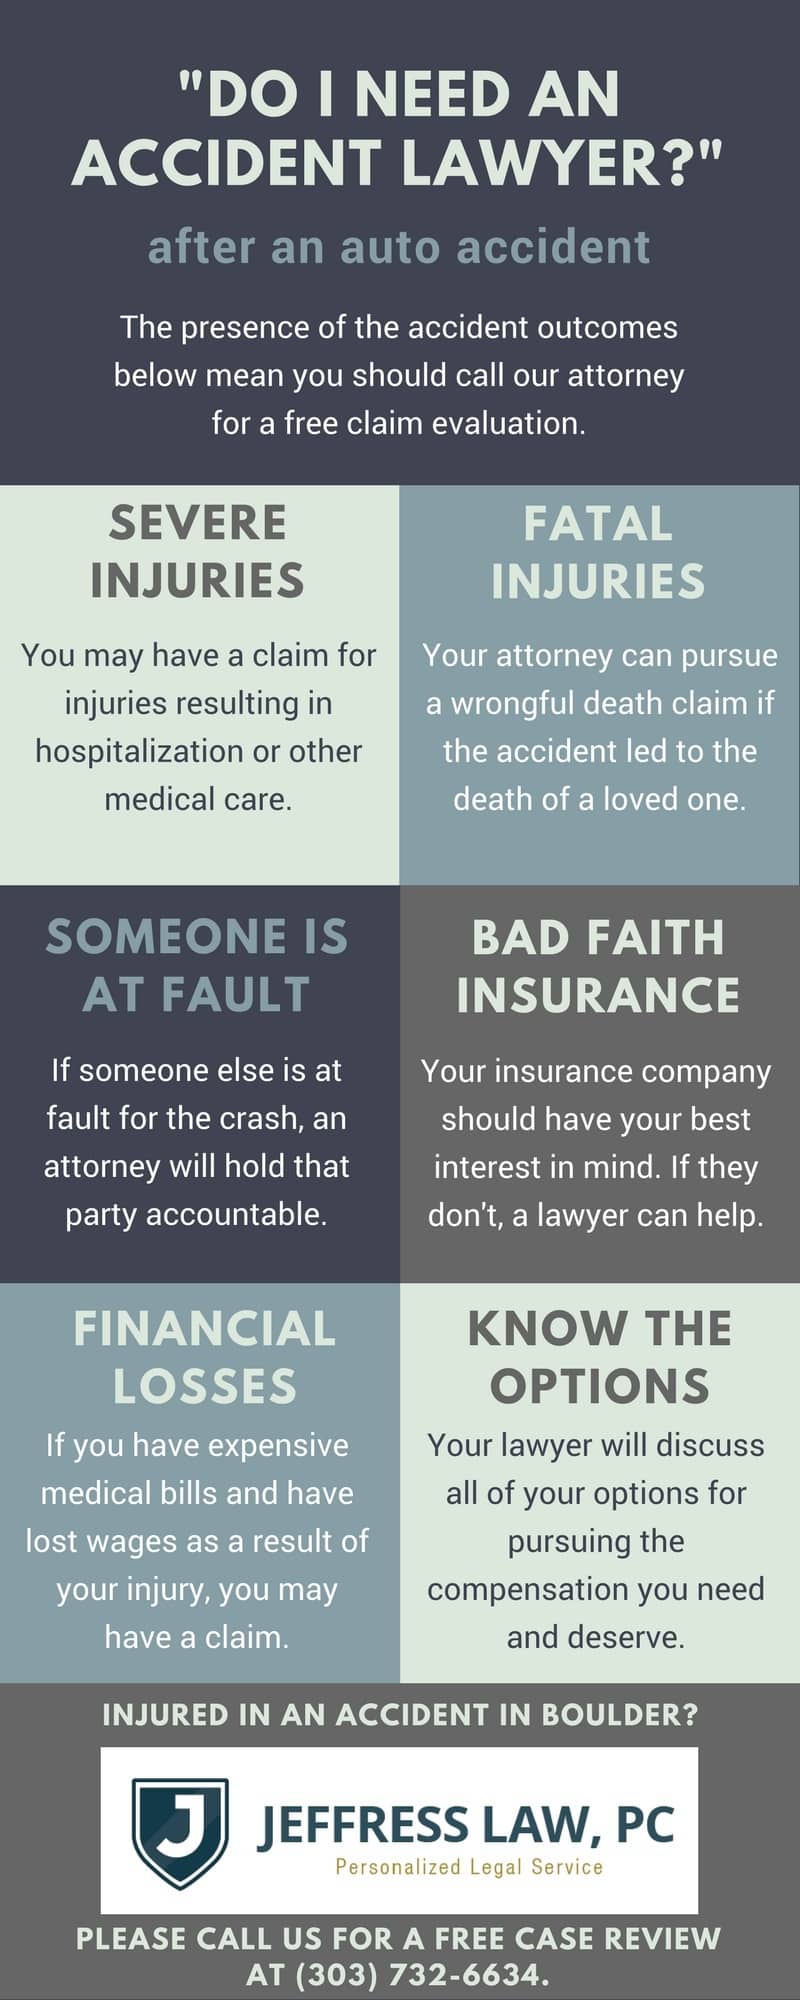 jeffress infographic do i need an attorney tm 10 20 17